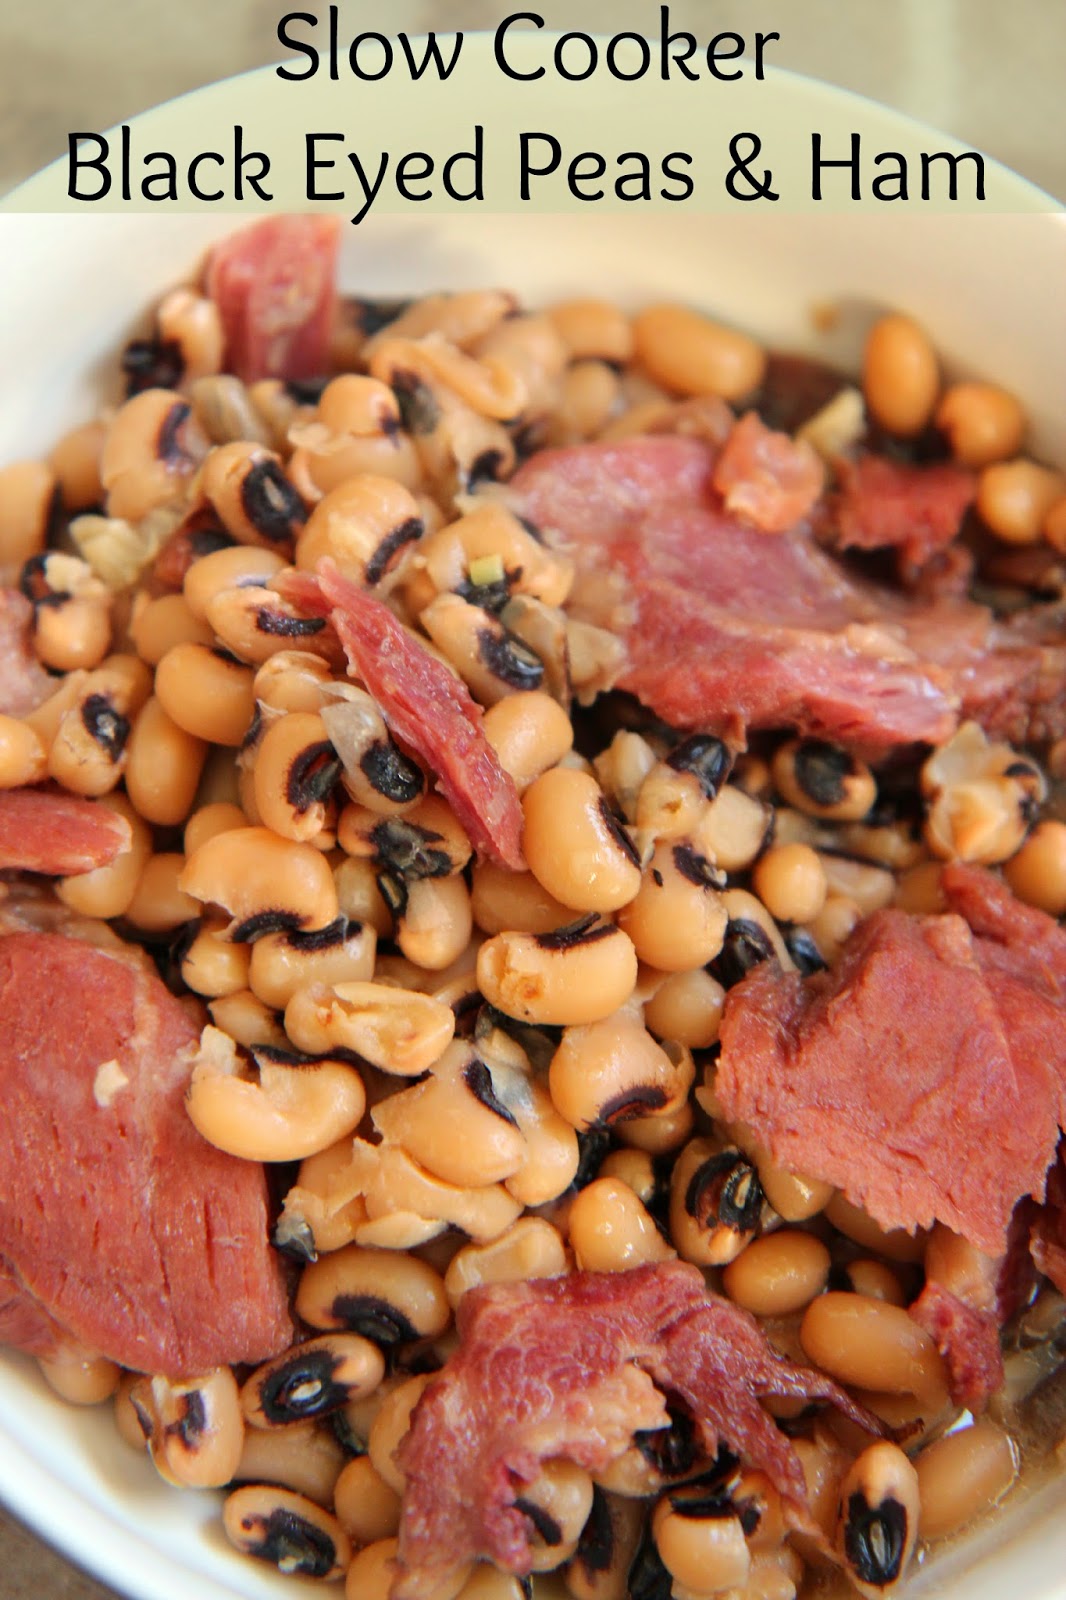 This easy slow cooker recipe uses a bag of dried black eyed peas, a ham bone, a little garlic and lots of time in the crockpot!